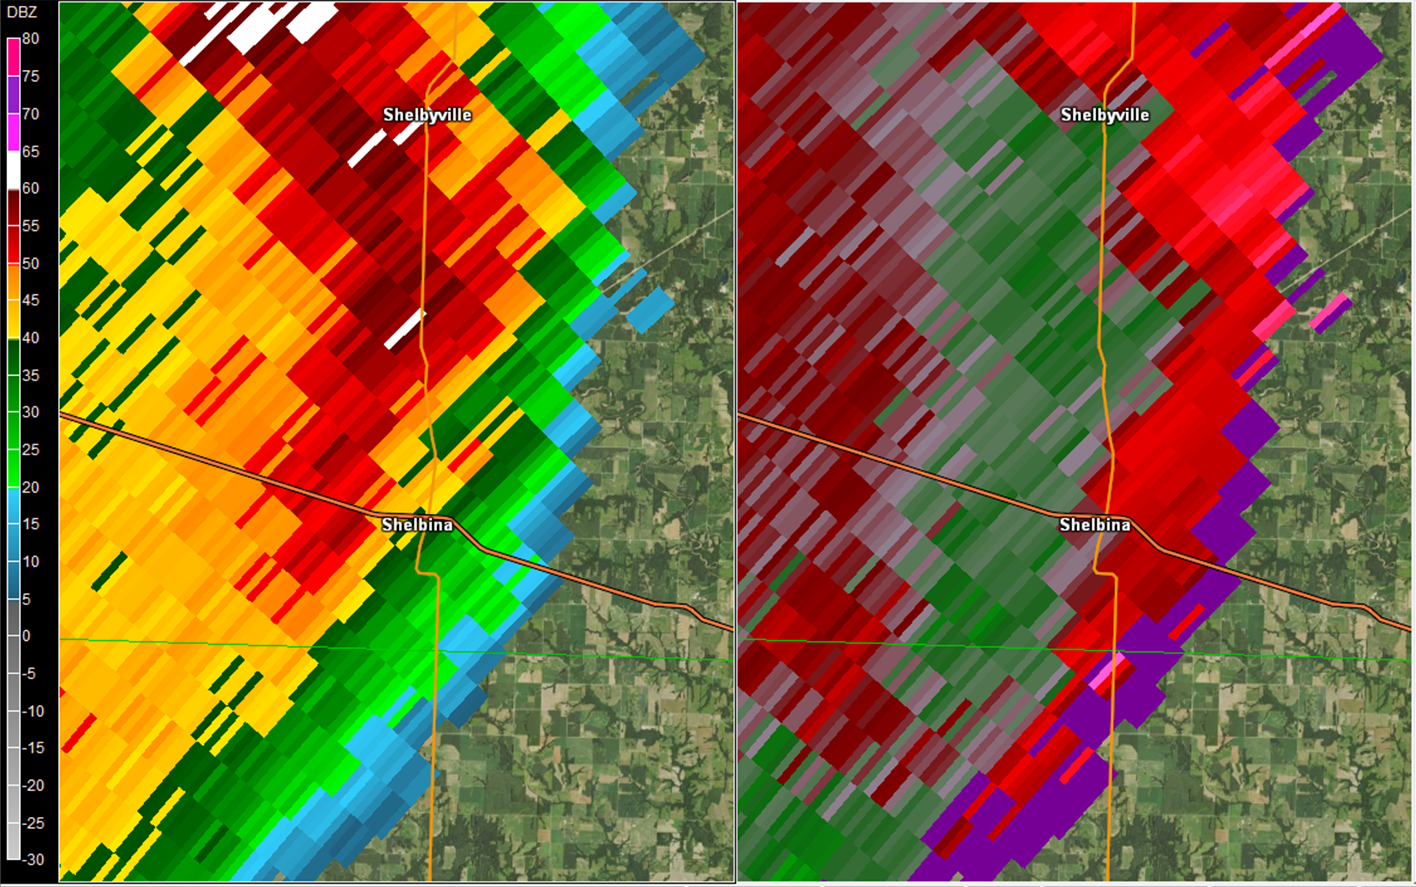 Two panel radar picture of the Shelbina tornado, reflectivity and storm relative velocity.